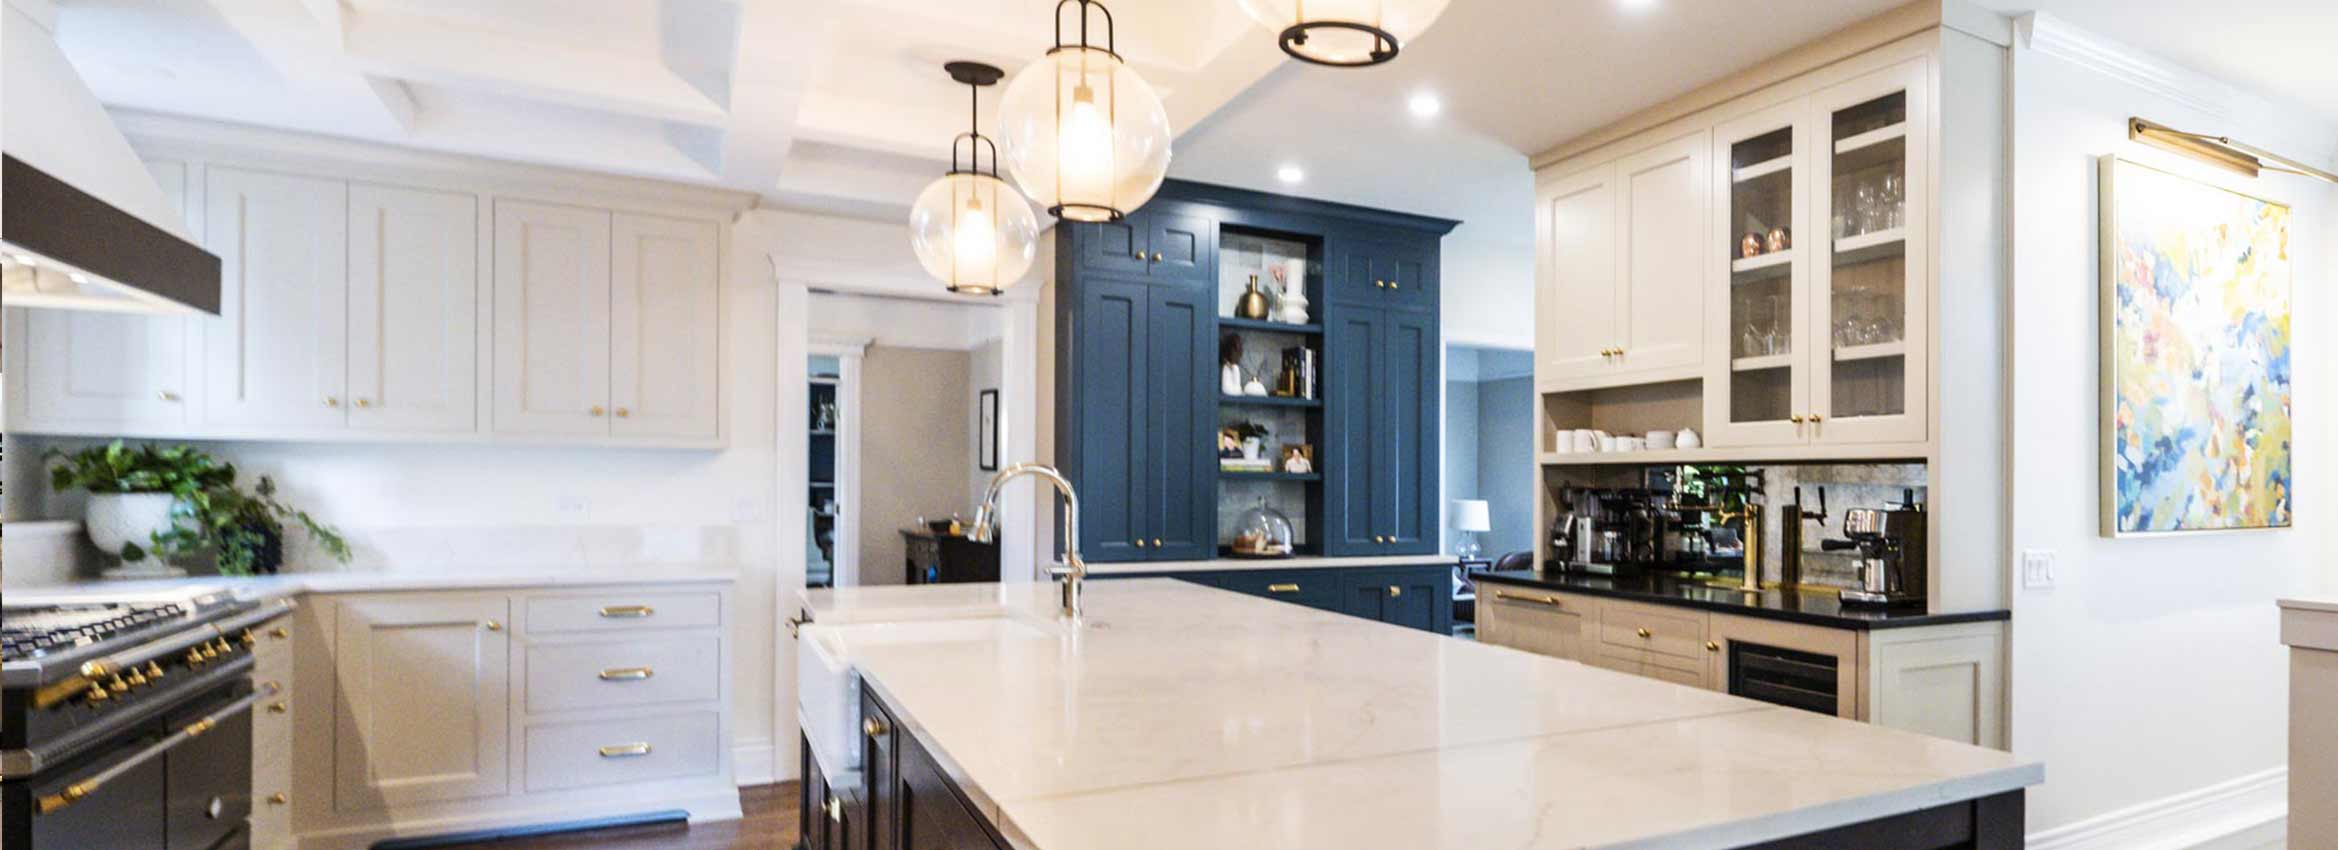 luxury kitchen remodel in la grange illinois with blue pantry cabinets stone countertops and gourmet range